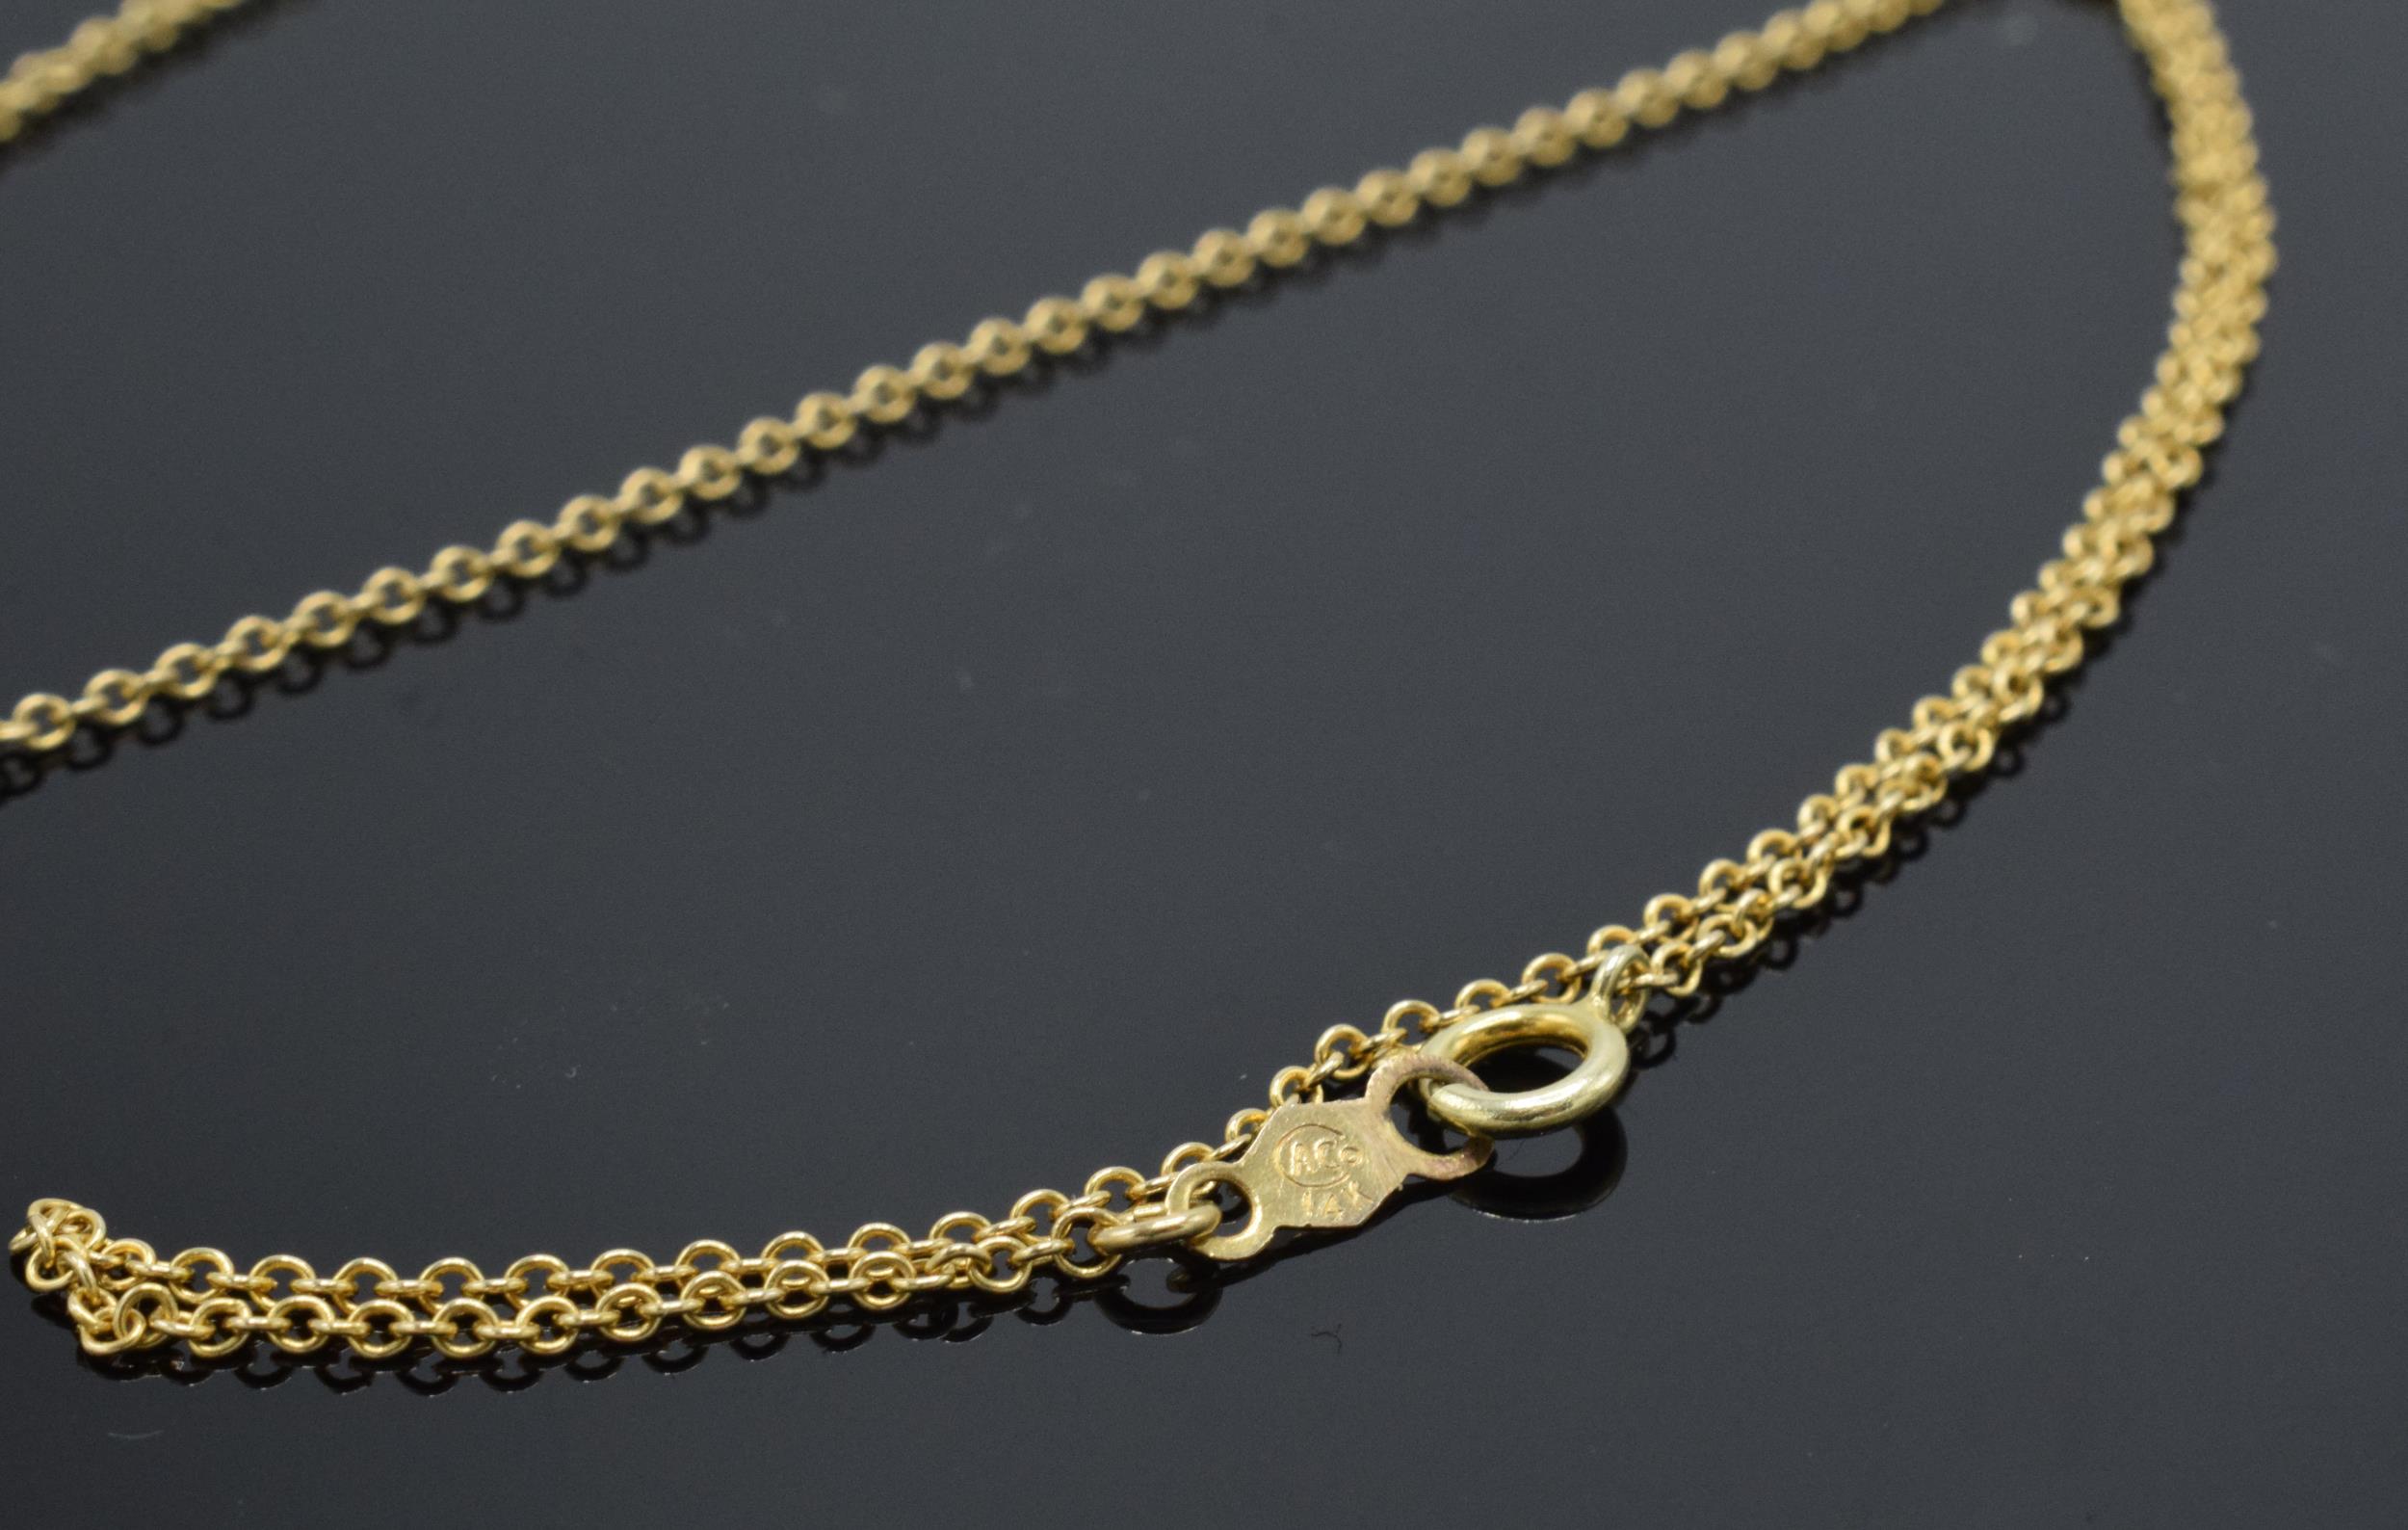 14ct gold fine link chain / necklace, 1.3 grams, 41cm long. - Image 3 of 4